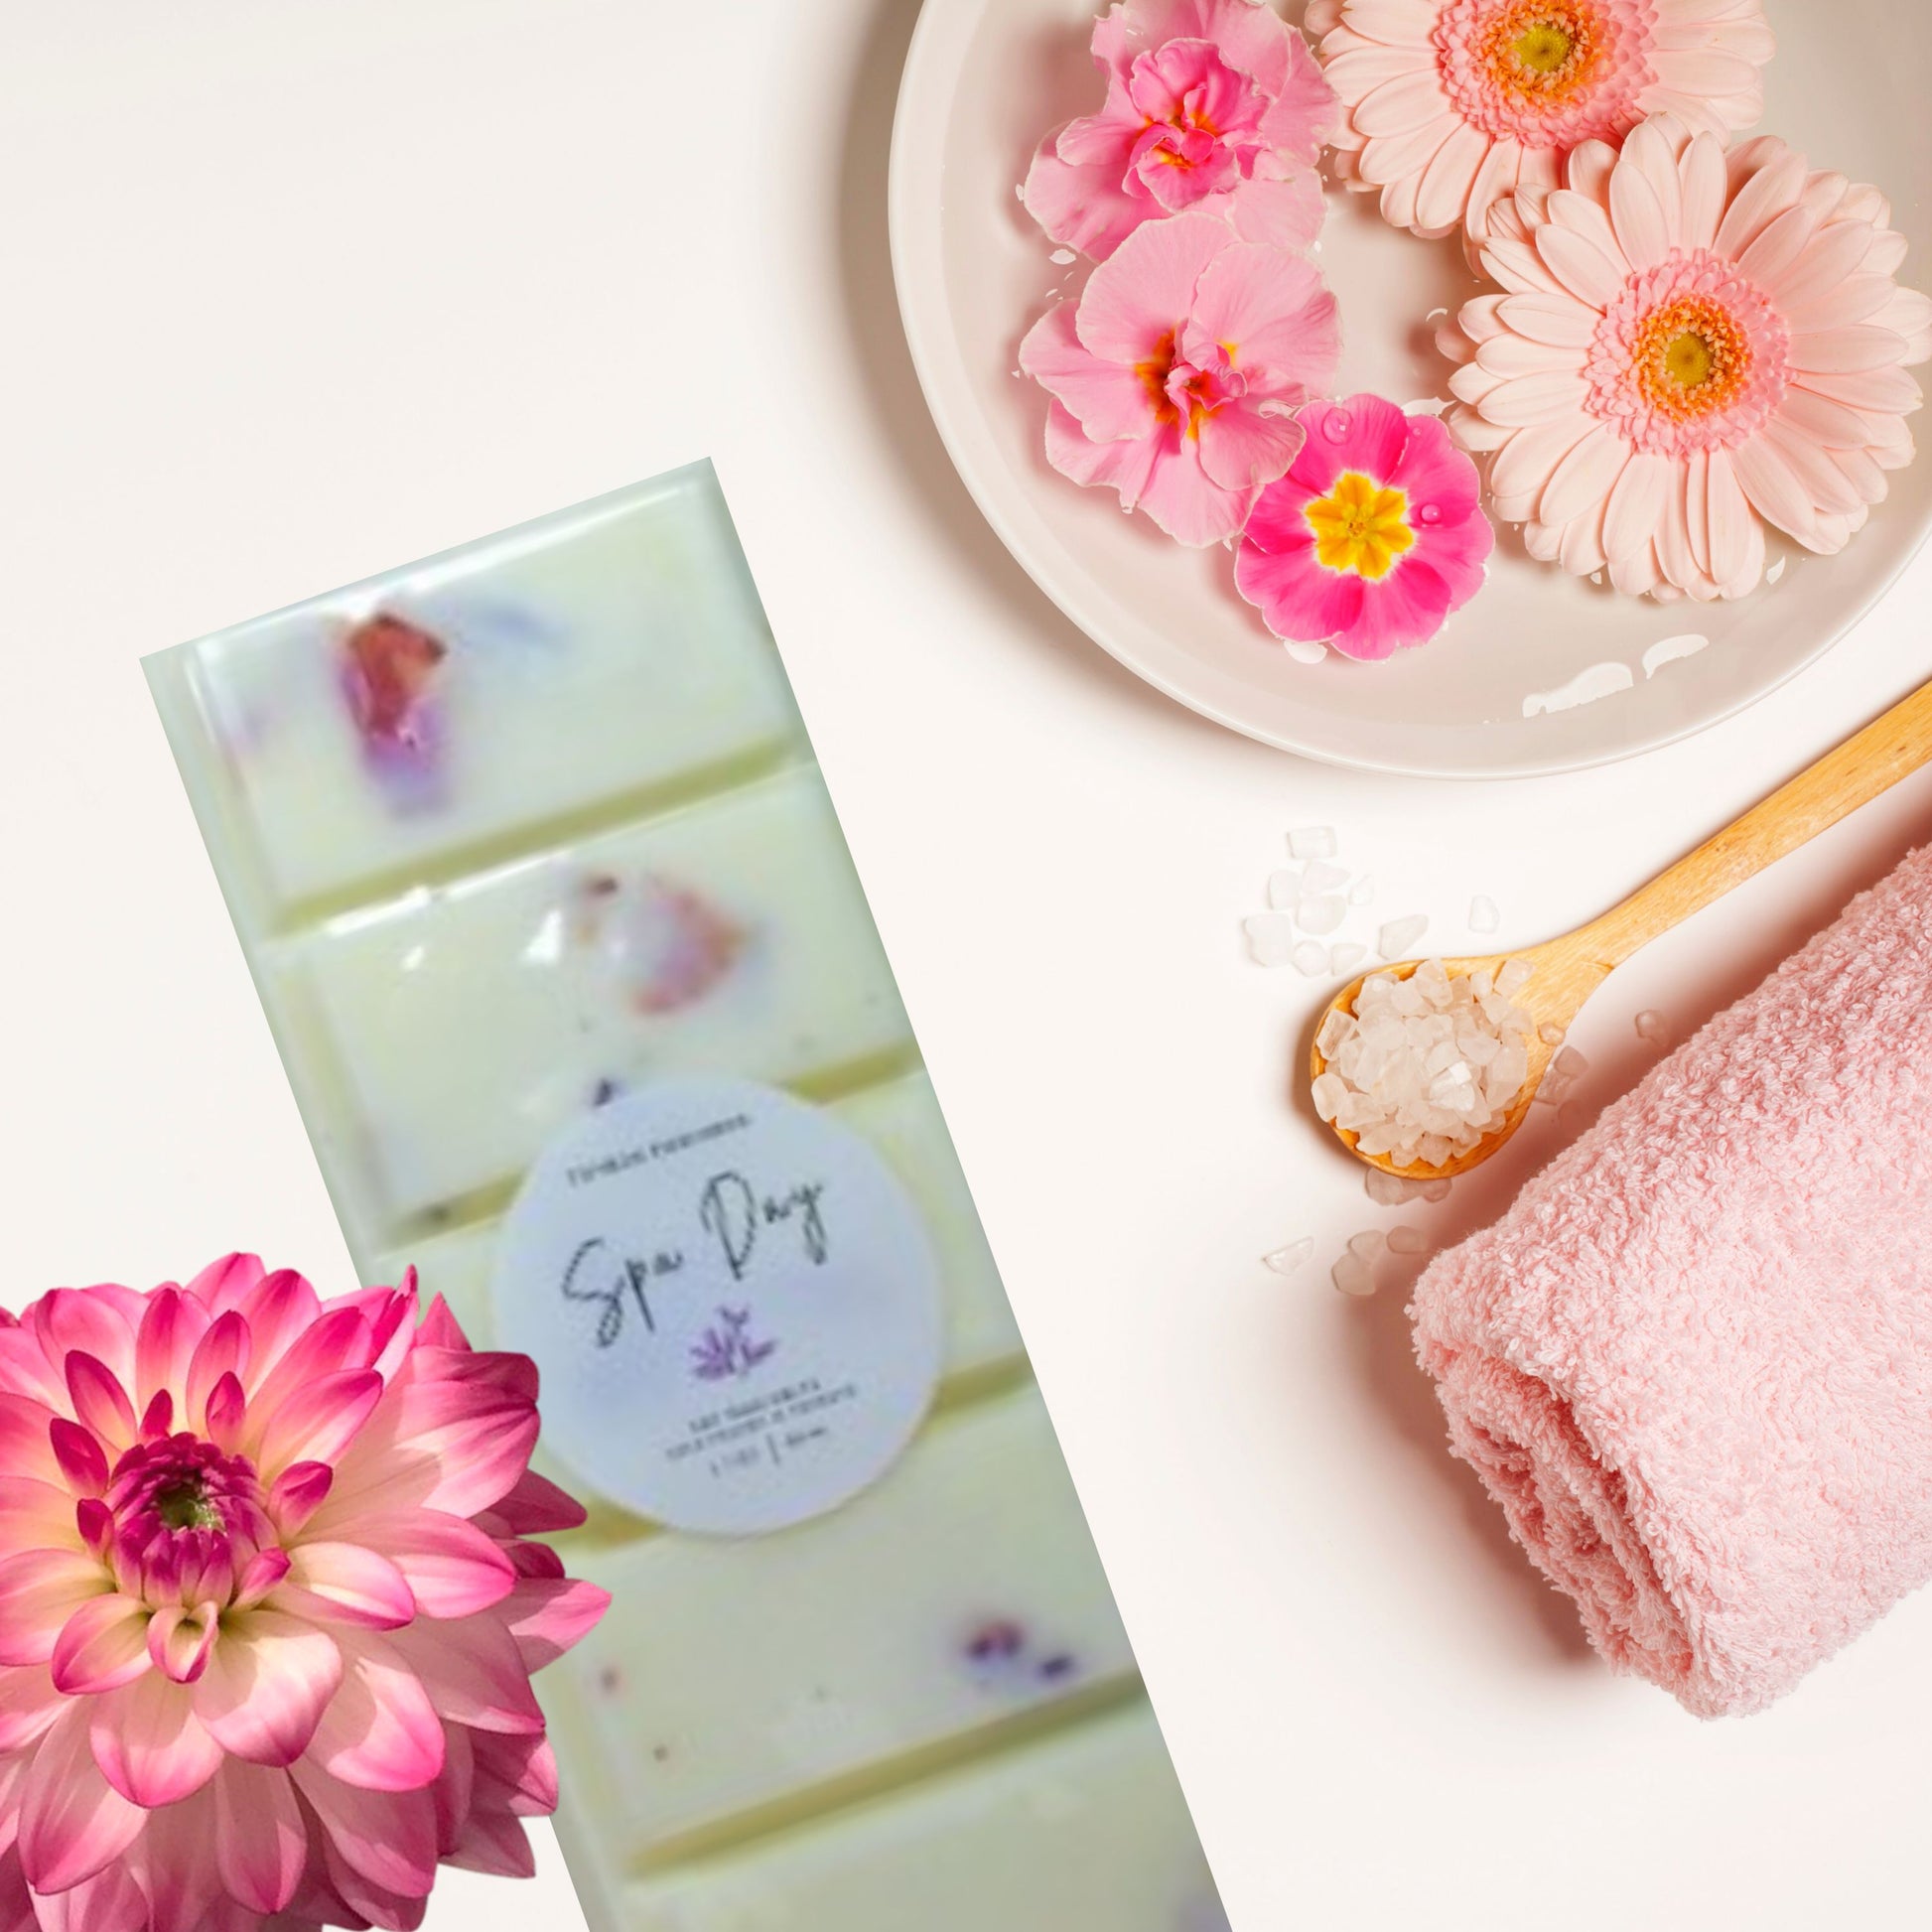 Spa Day All Summer Long Scented Soy Wax Melt Bars